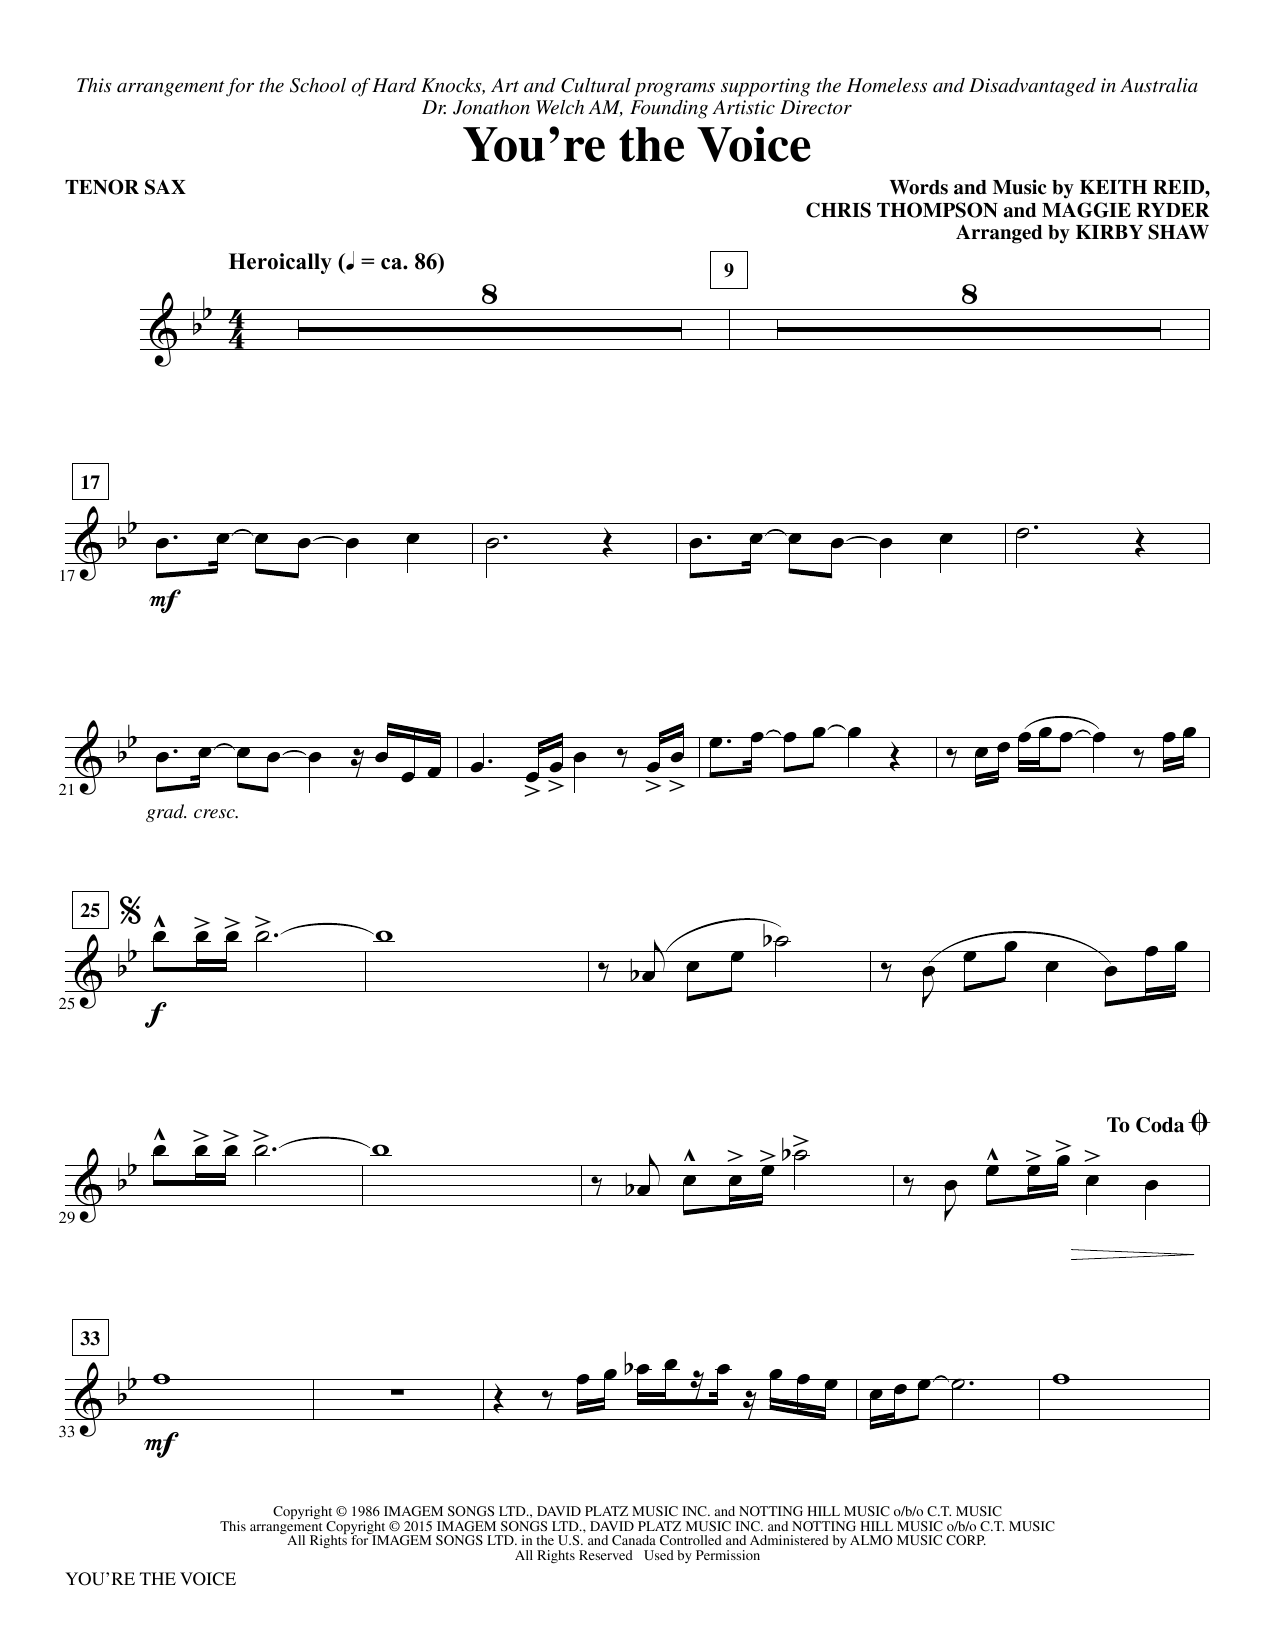 John Farnham You're the Voice (arr. Kirby Shaw) - Bb Tenor Saxophone sheet music notes and chords. Download Printable PDF.